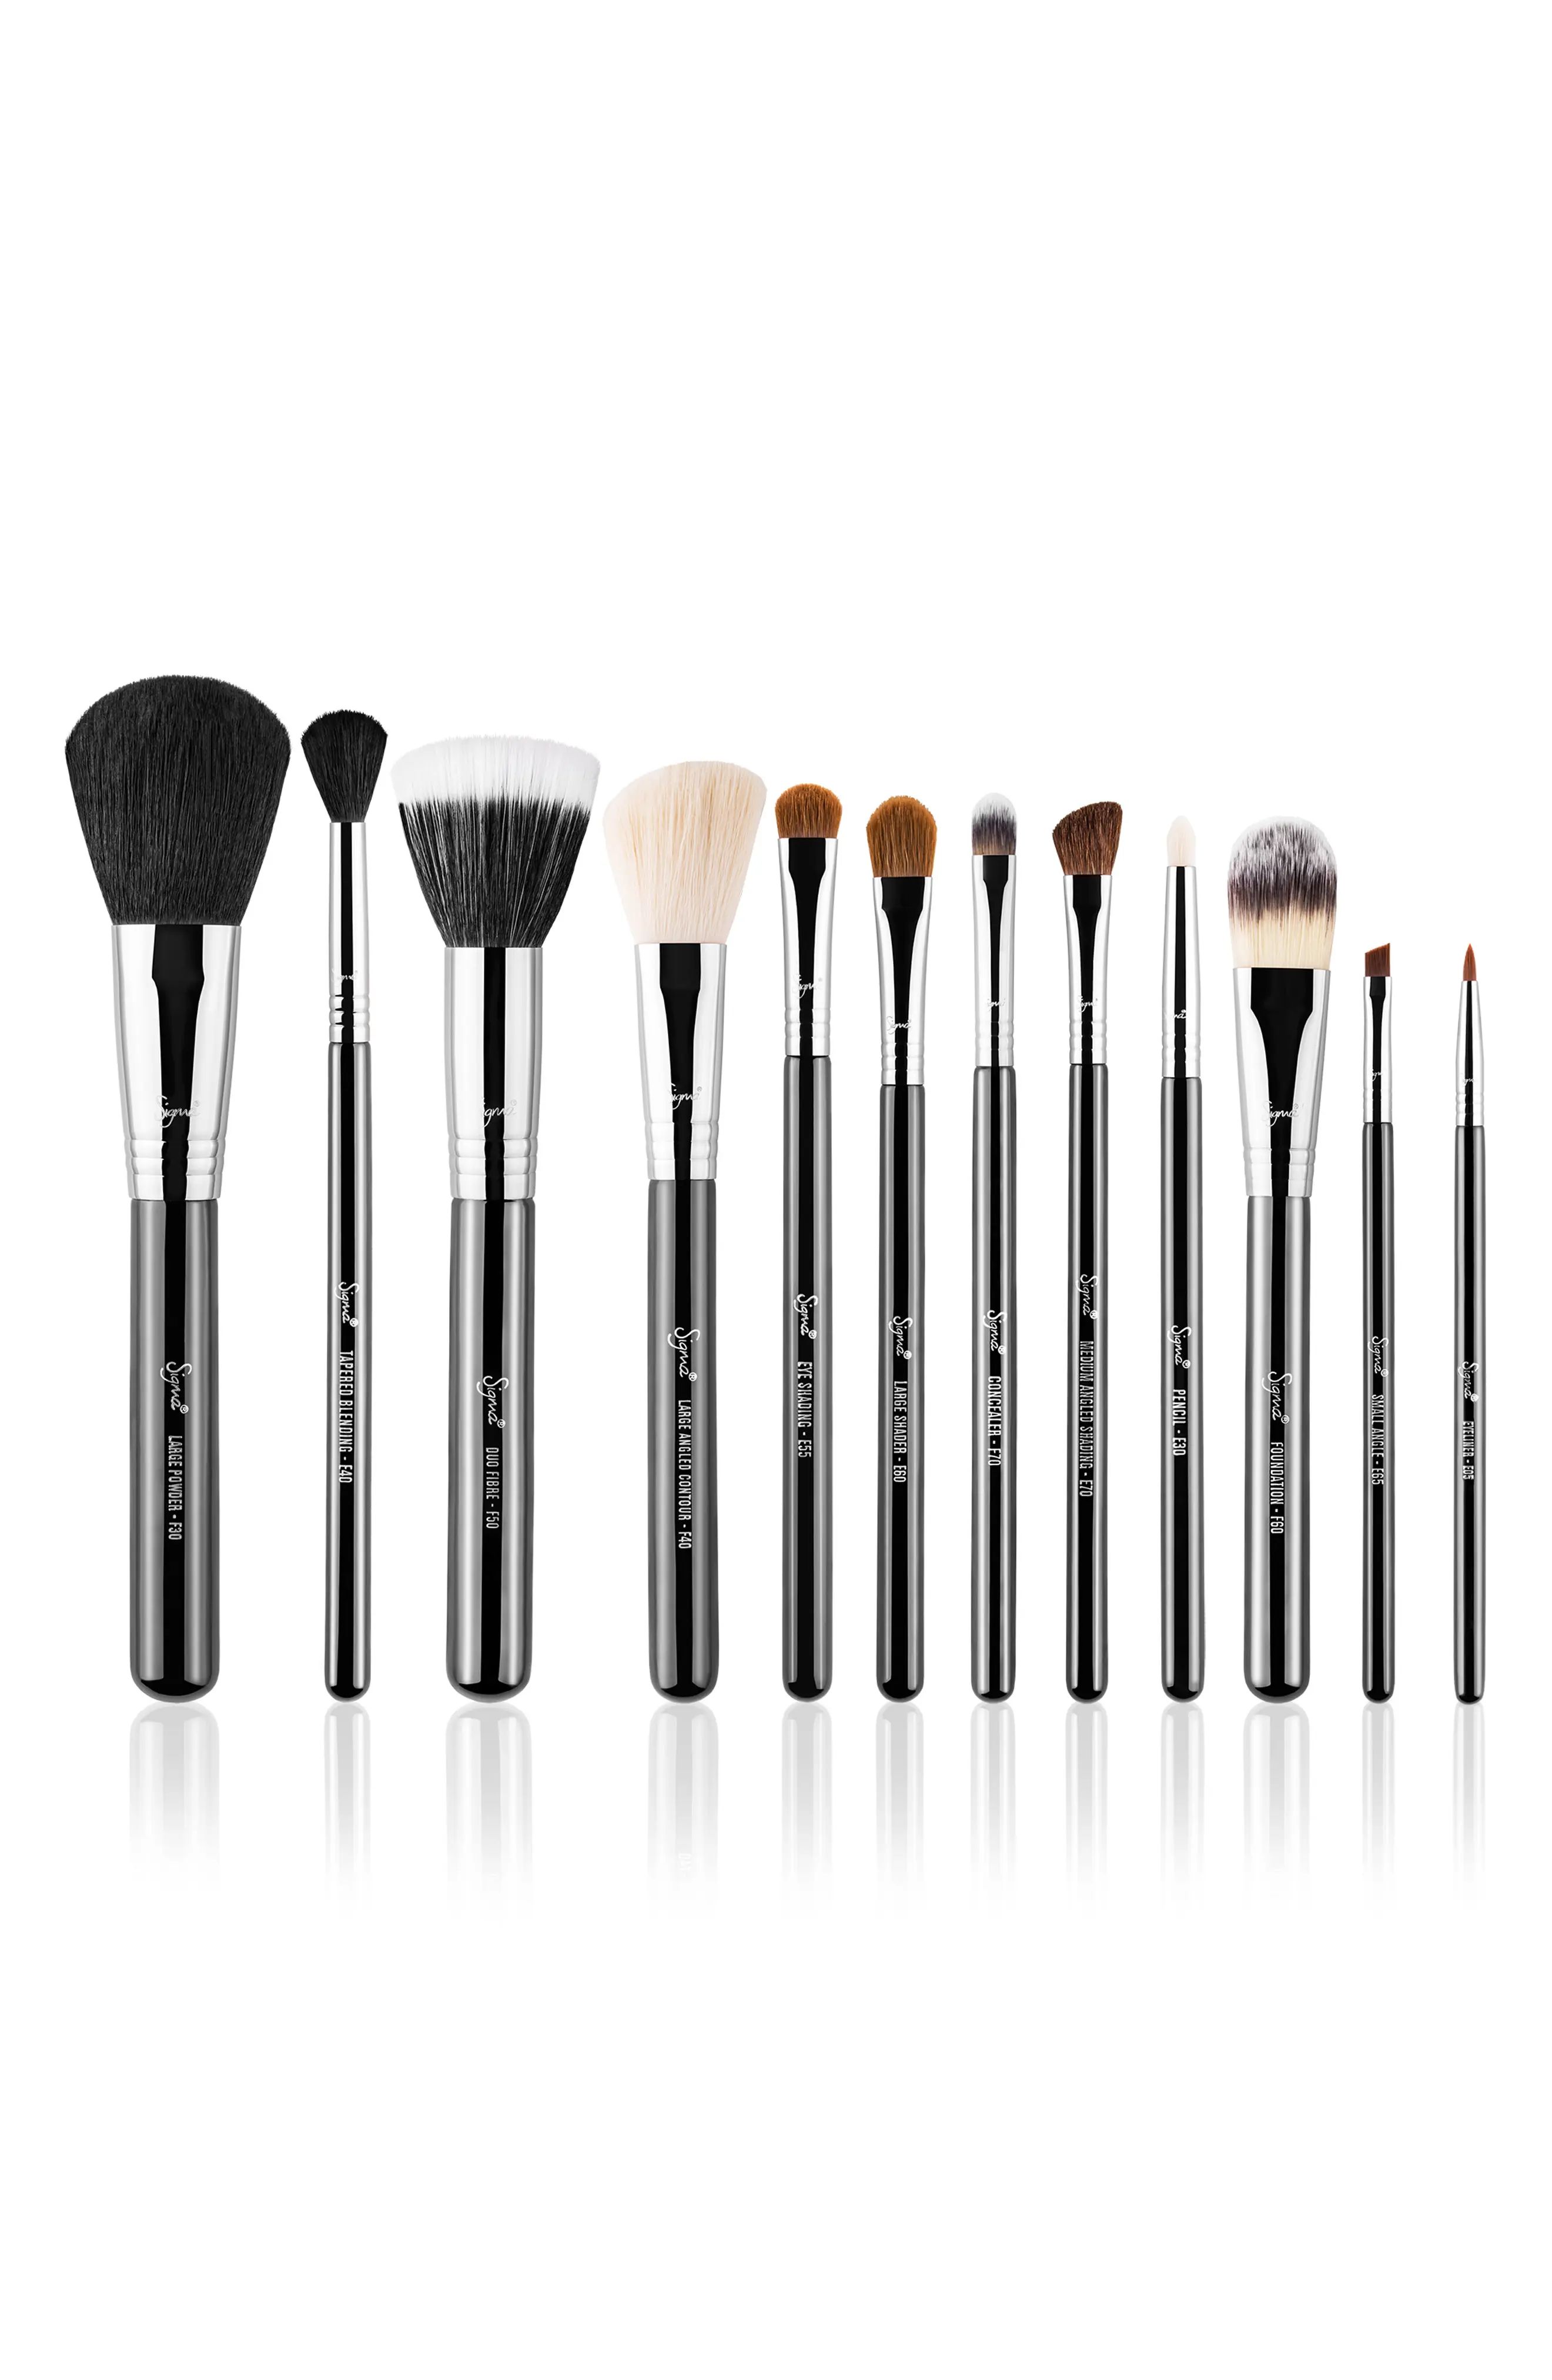 Sigma Beauty Essential Kit ($228 Value) | Nordstrom